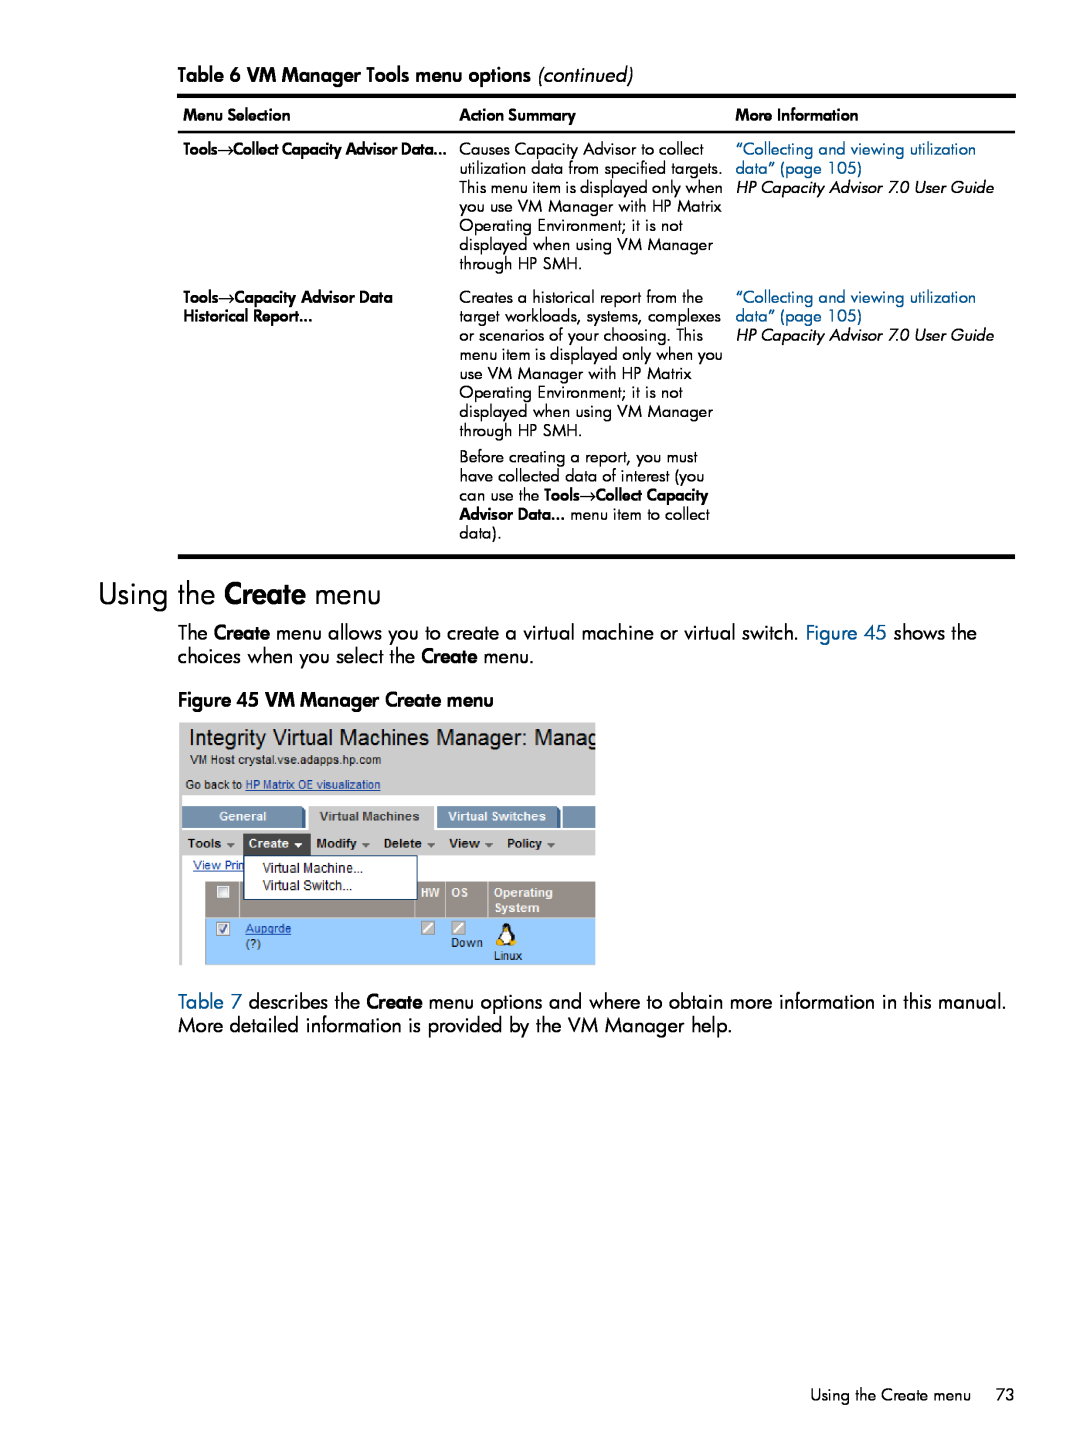 HP UX vPars and Integrity VM v6 manual Using the Create menu, “Collecting and viewing utilization, data” page 